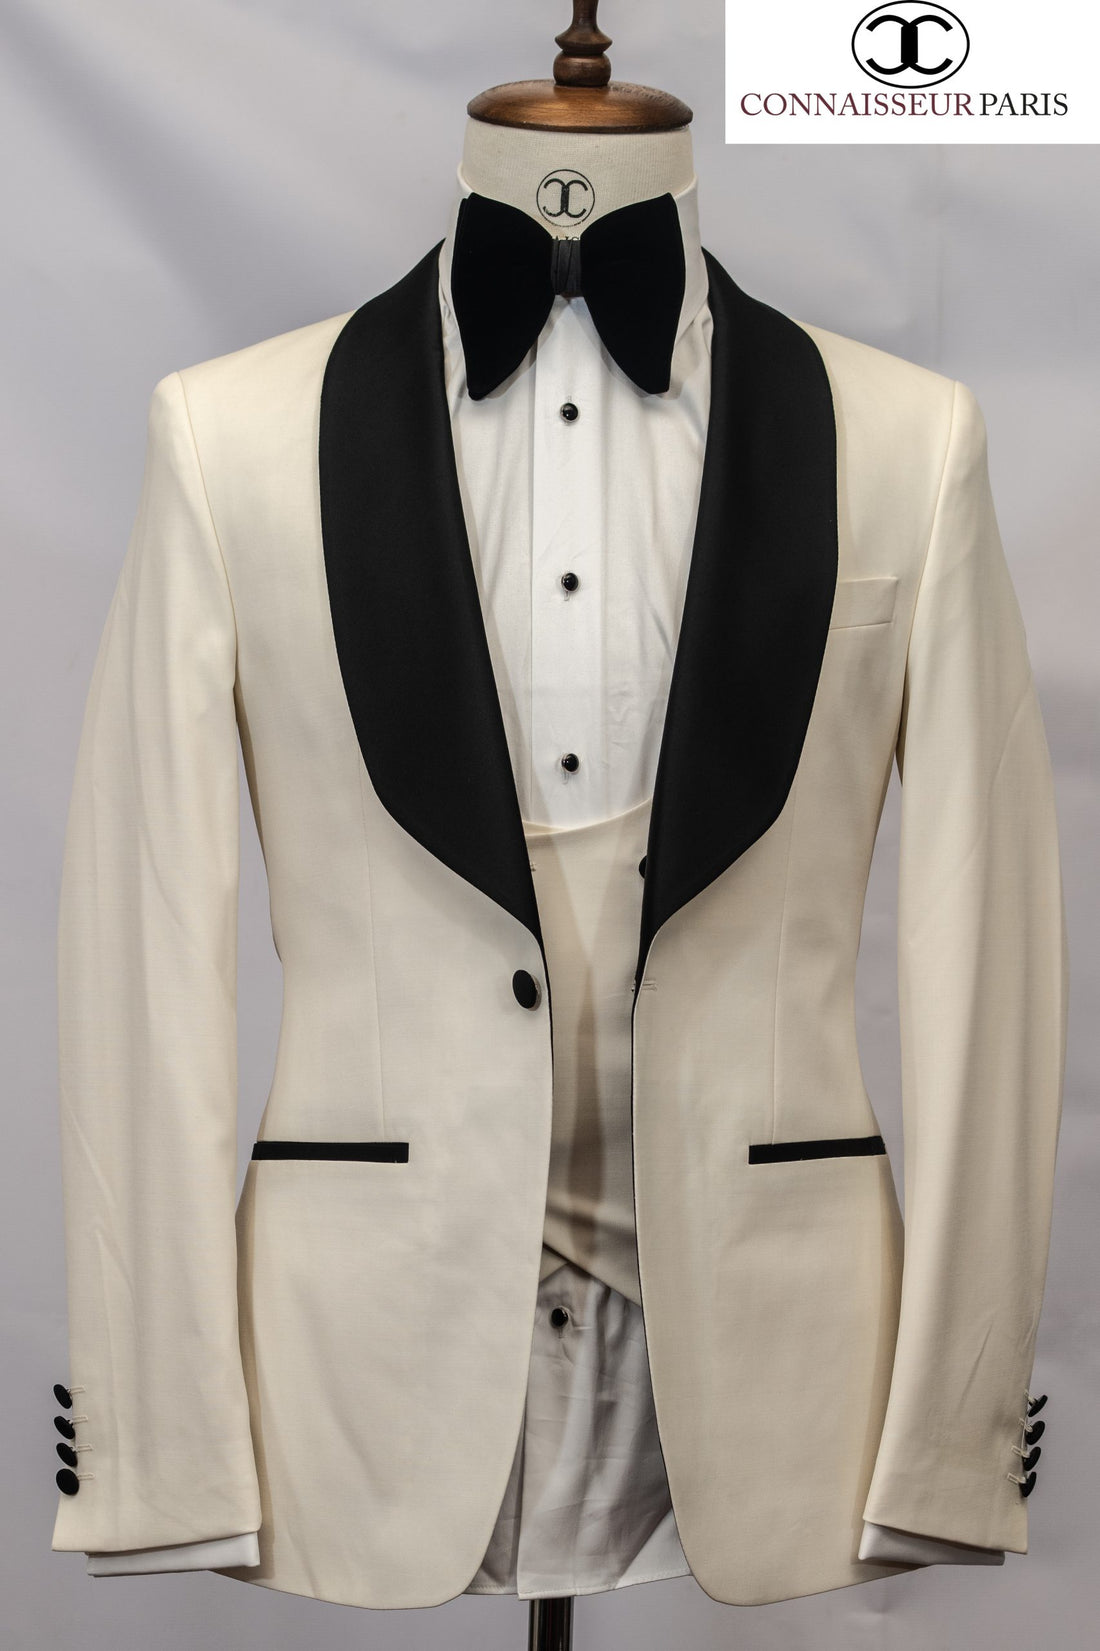 Connaisseur - Cream white classic 3-piece slim fit tuxedo with shawl lapel and double breasted U vest